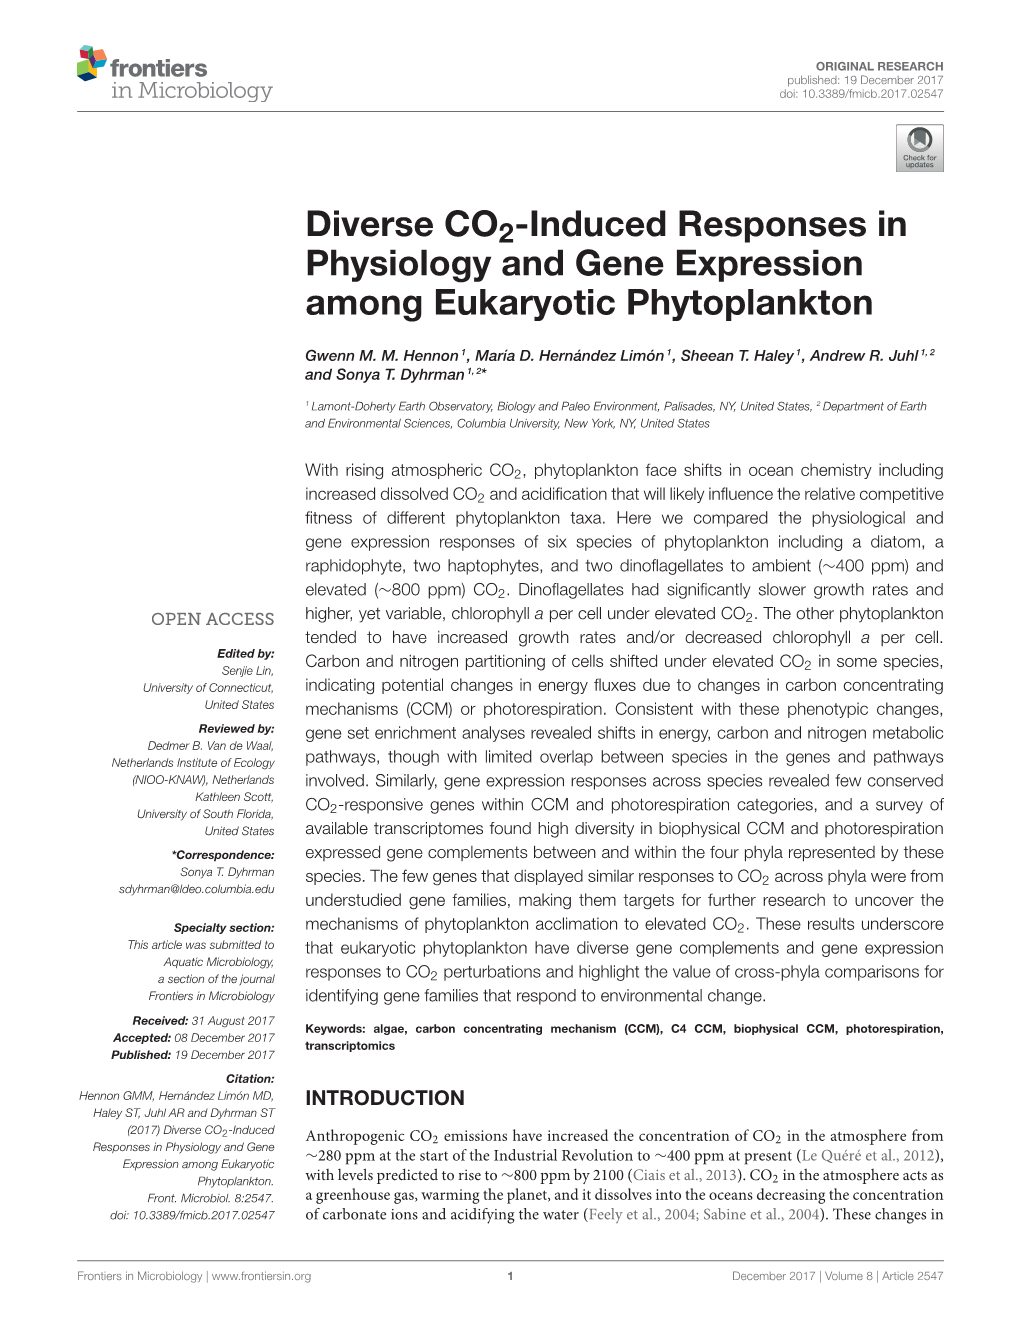 Diverse CO2-Induced Responses in Physiology and Gene Expression Among Eukaryotic Phytoplankton